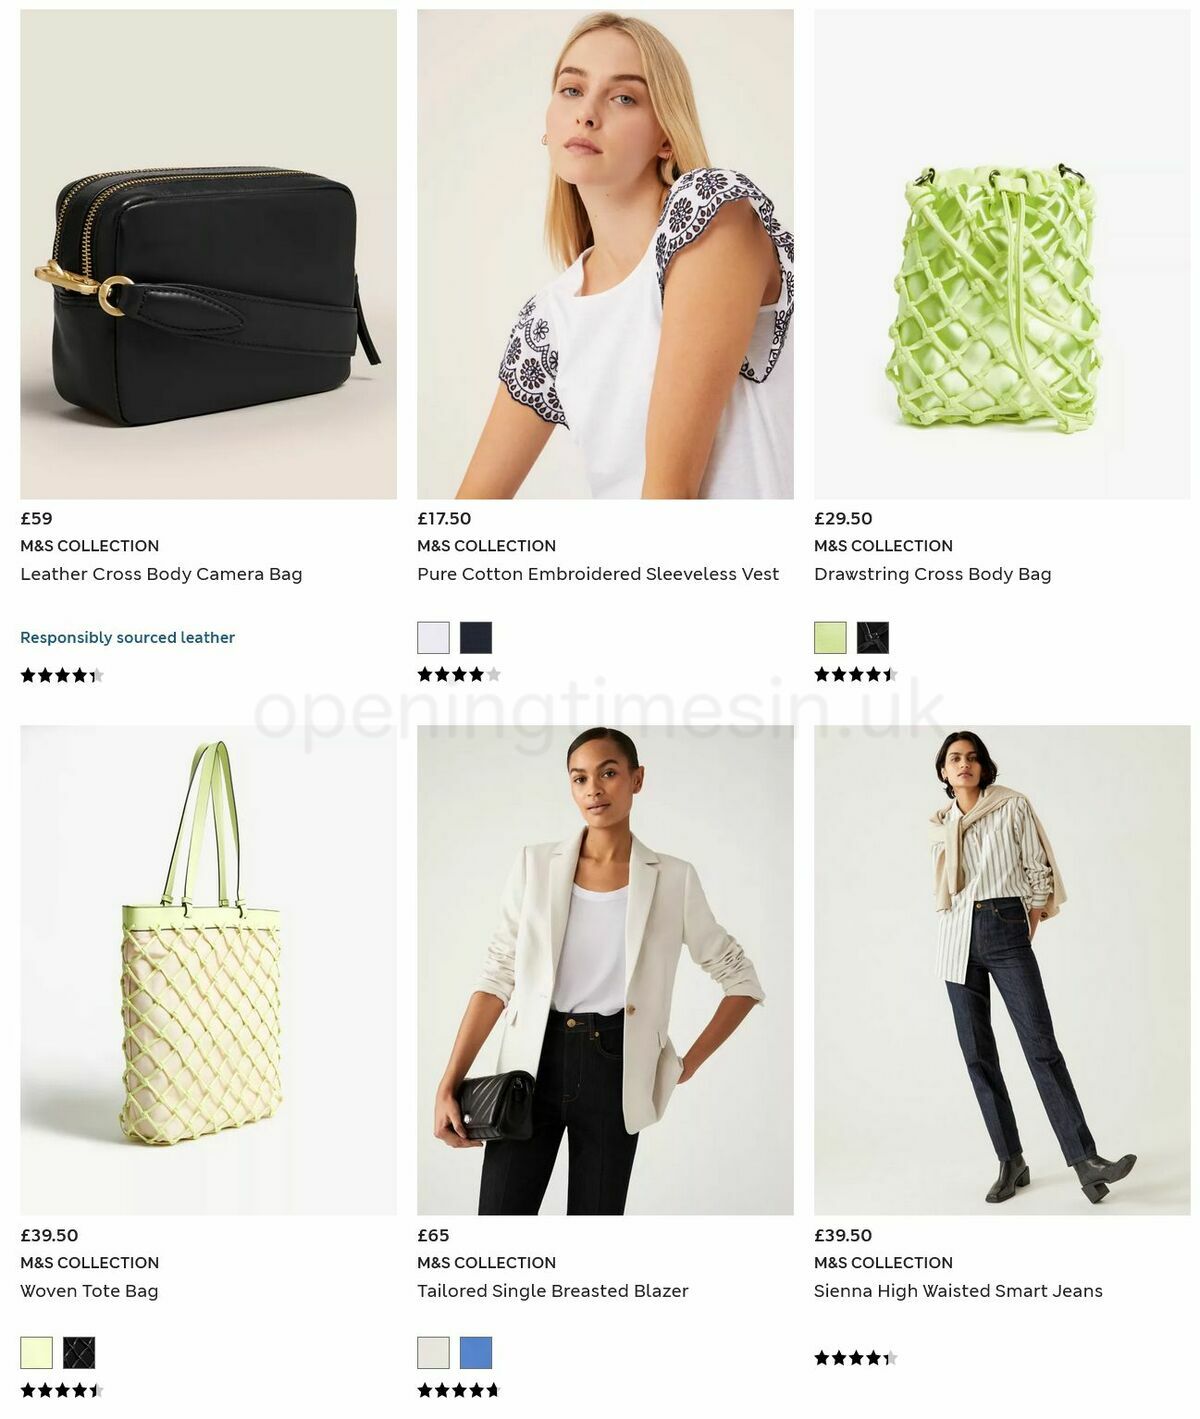 M&S Marks and Spencer Offers from 15 May